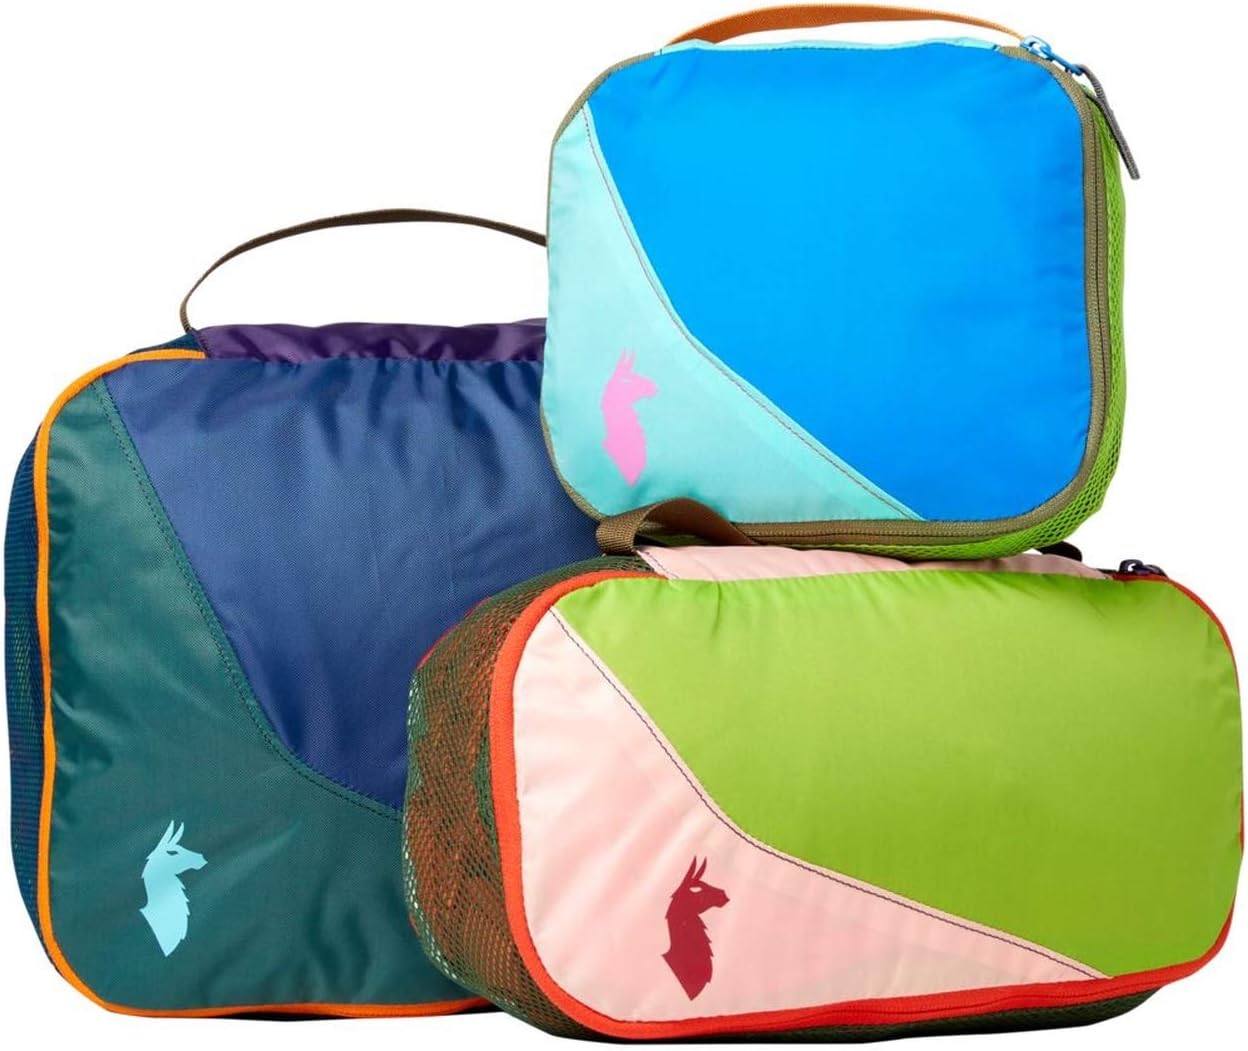 Cotopaxi Packing Cubes